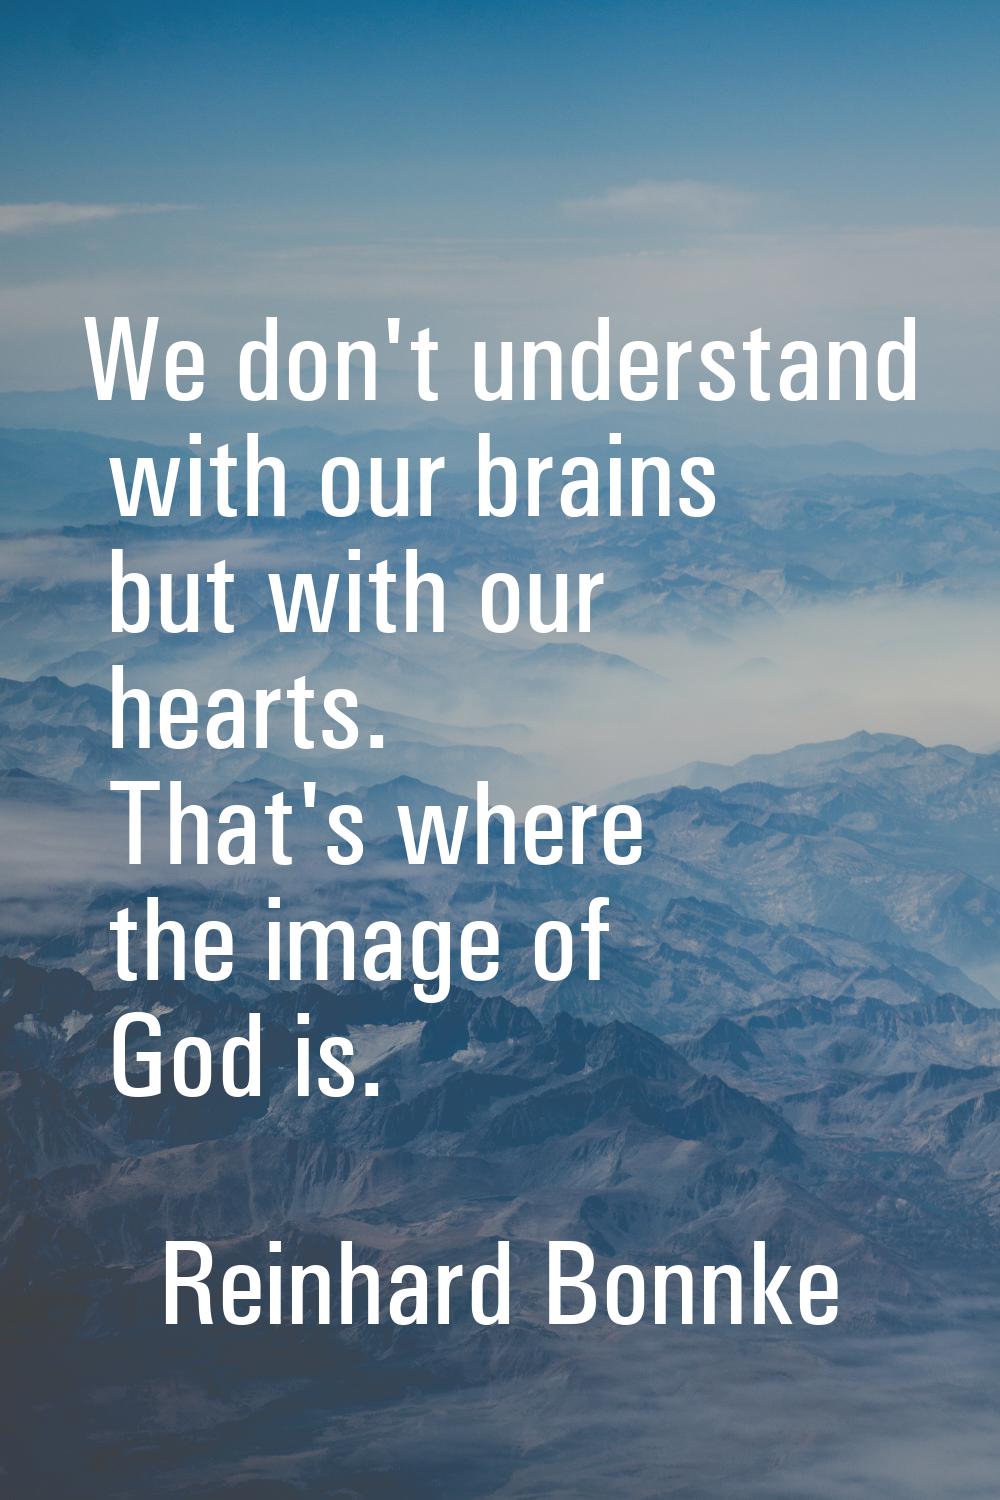 We don't understand with our brains but with our hearts. That's where the image of God is.